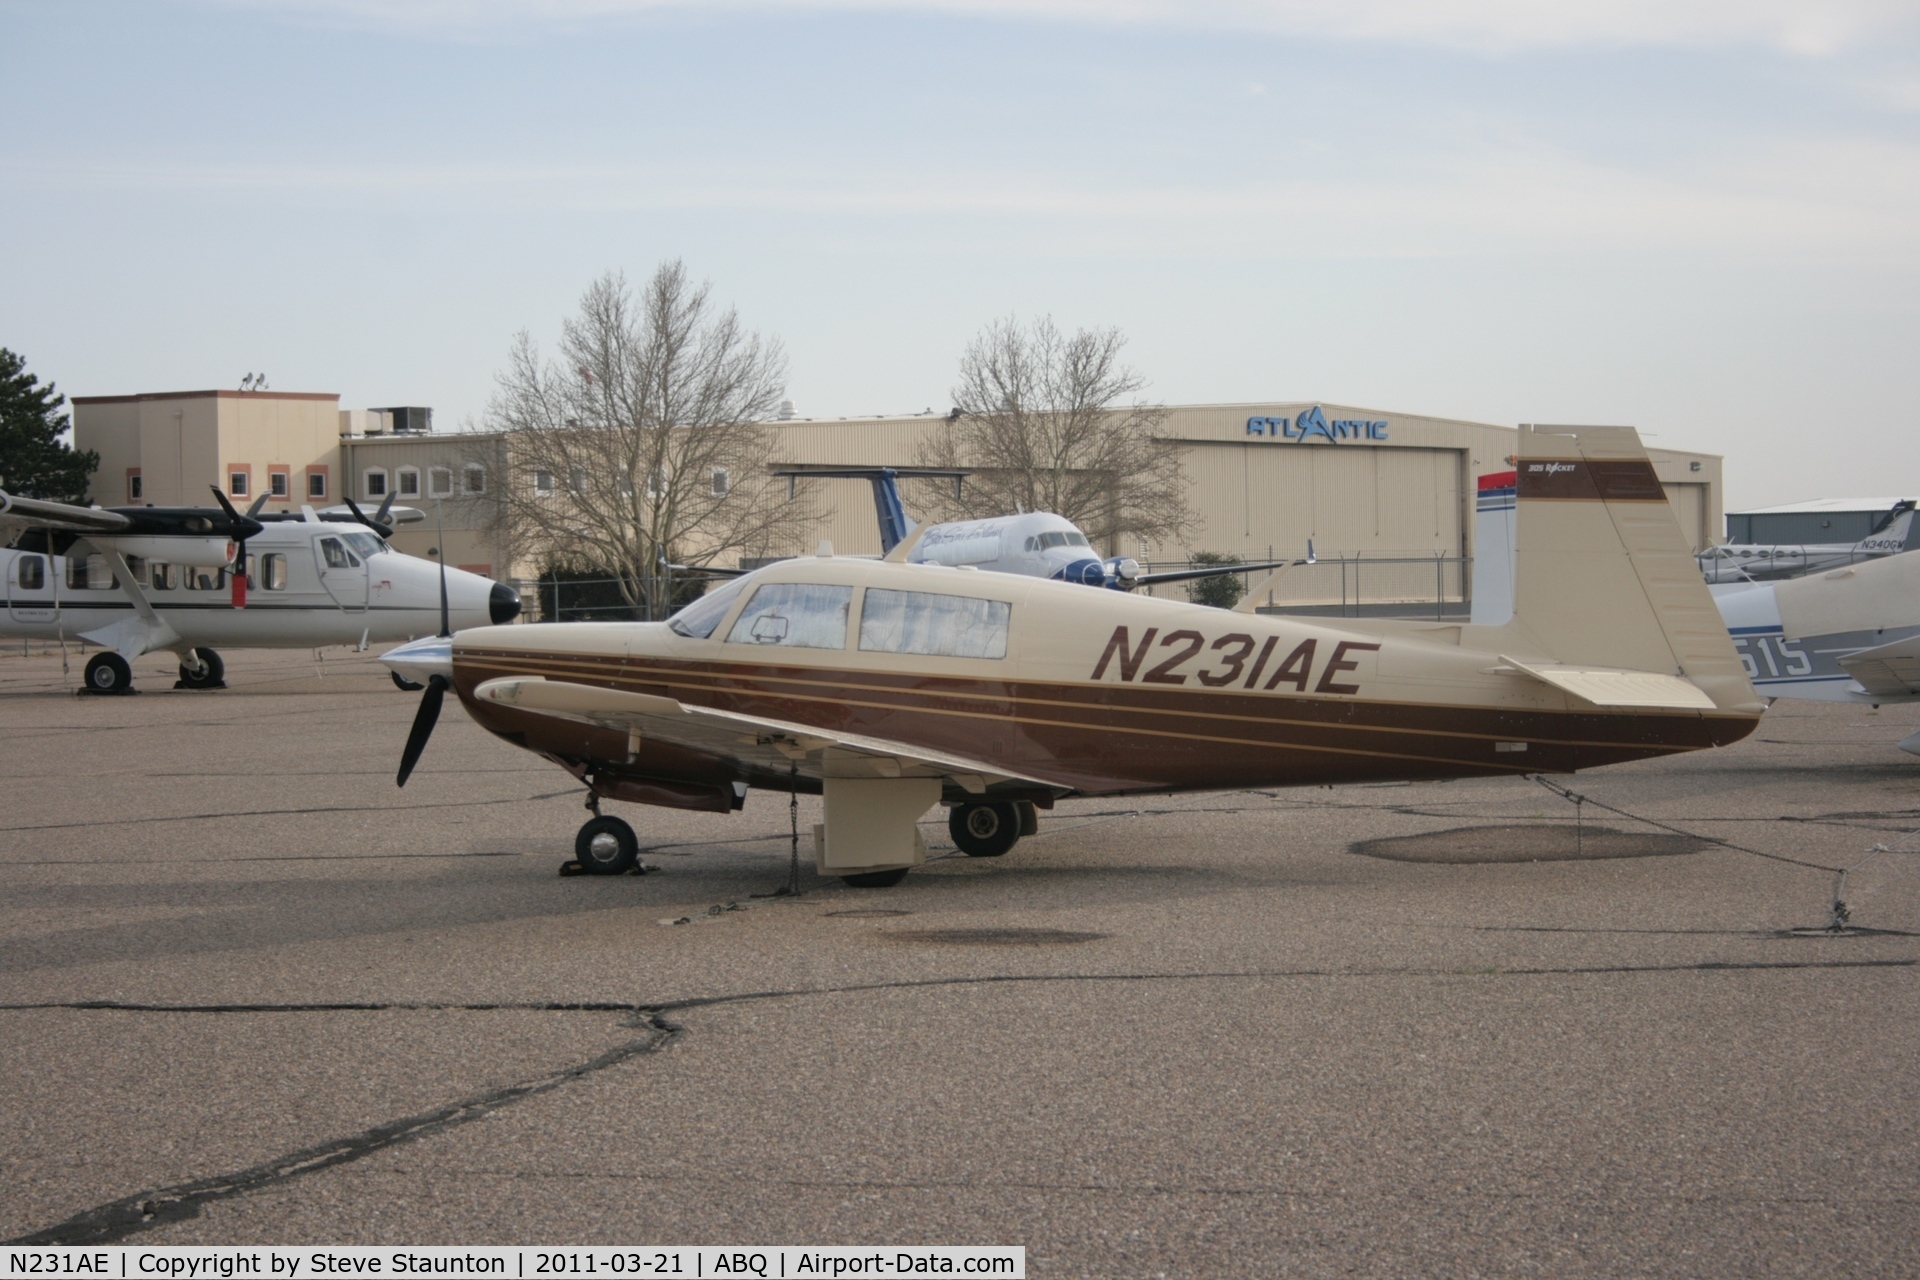 N231AE, 1979 Mooney M20K C/N 25-0054, Taken at Alburquerque International Sunport Airport, New Mexico in March 2011 whilst on an Aeroprint Aviation tour